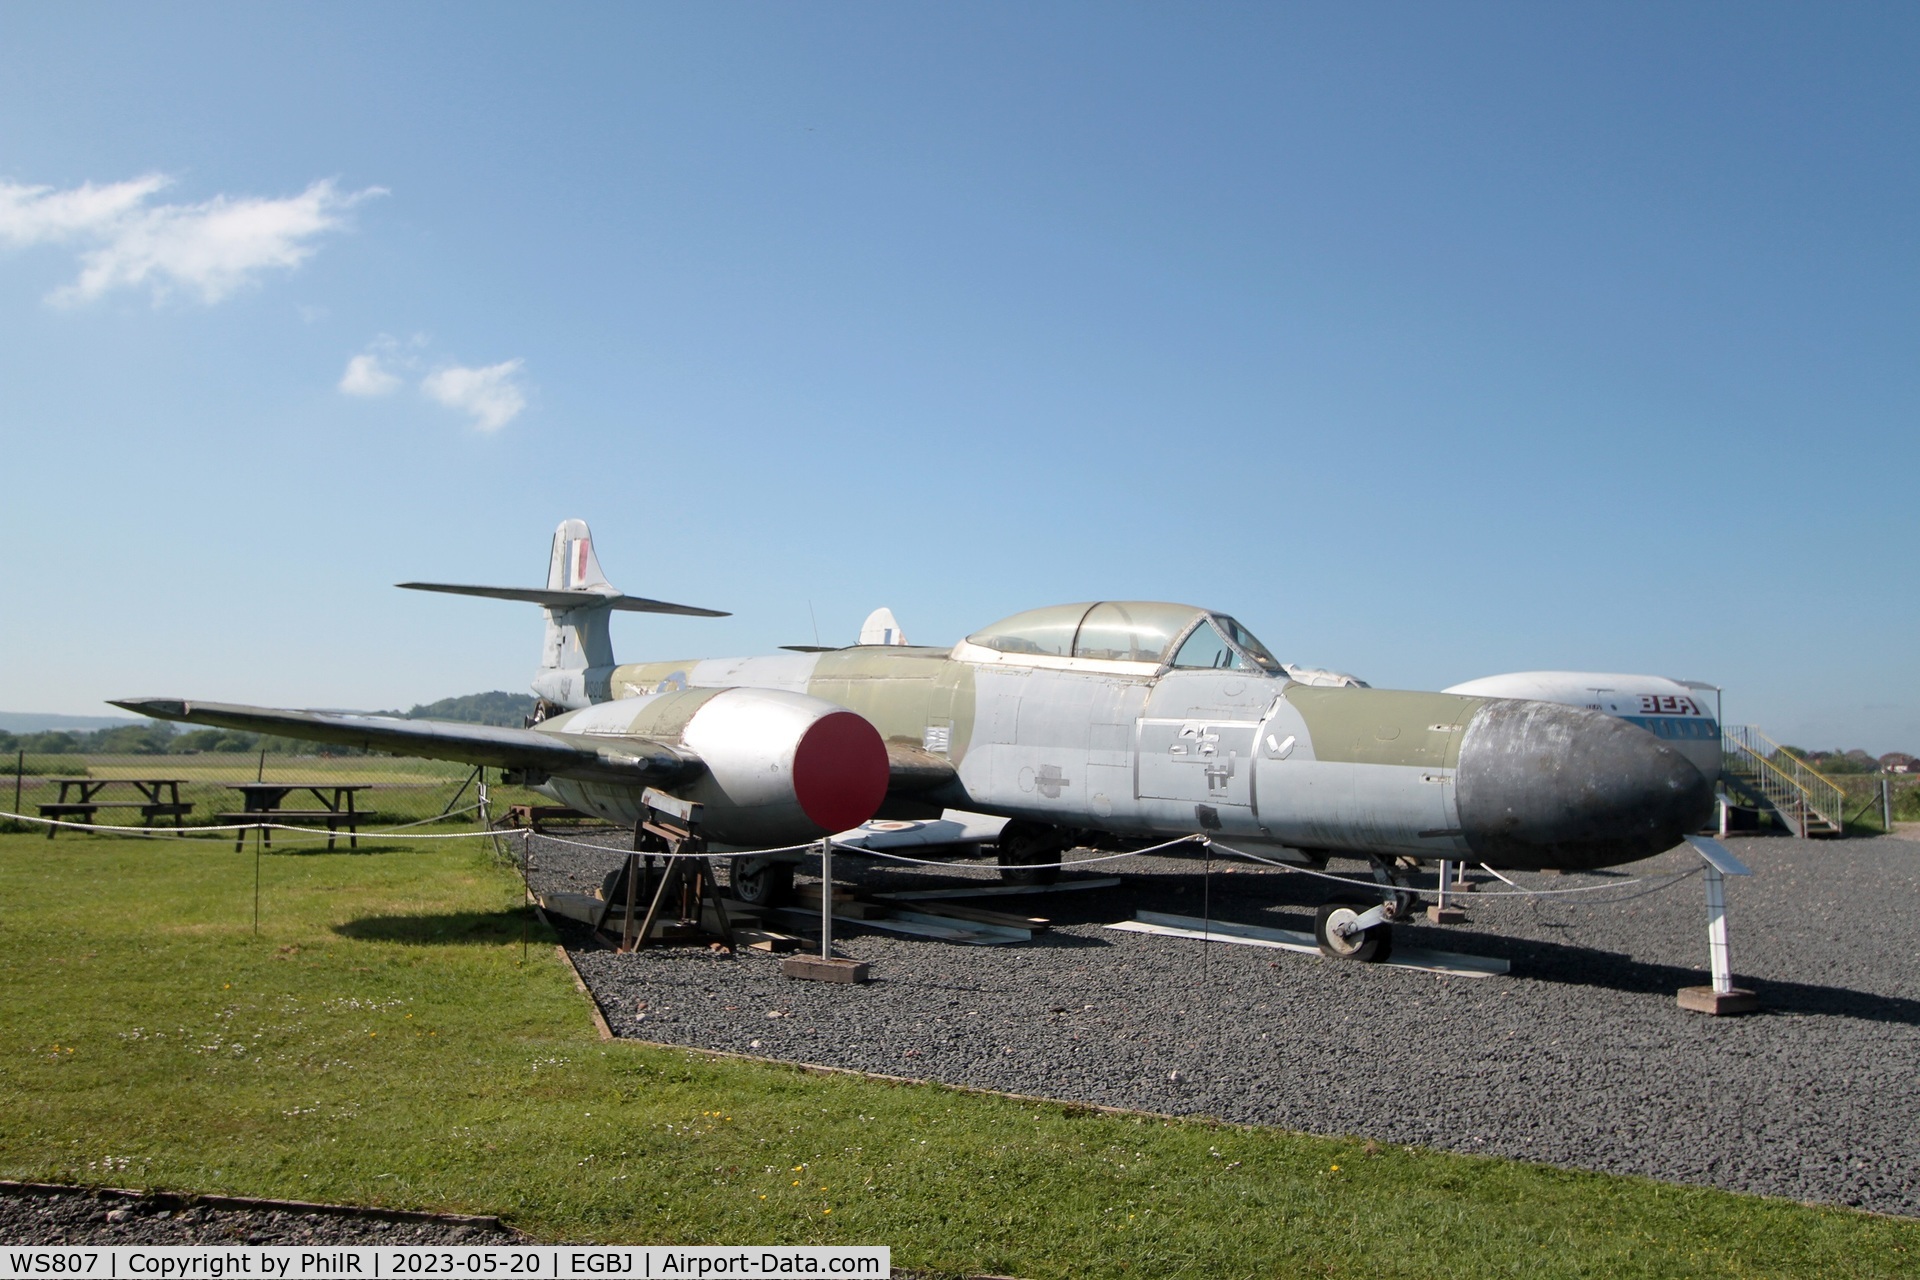 WS807, 1954 Gloster Meteor NF(T).14 C/N Not found WS807, WS807 1954 Armstrong Whitworth Meteor NF(T)14  Jet Age Museum Staverton